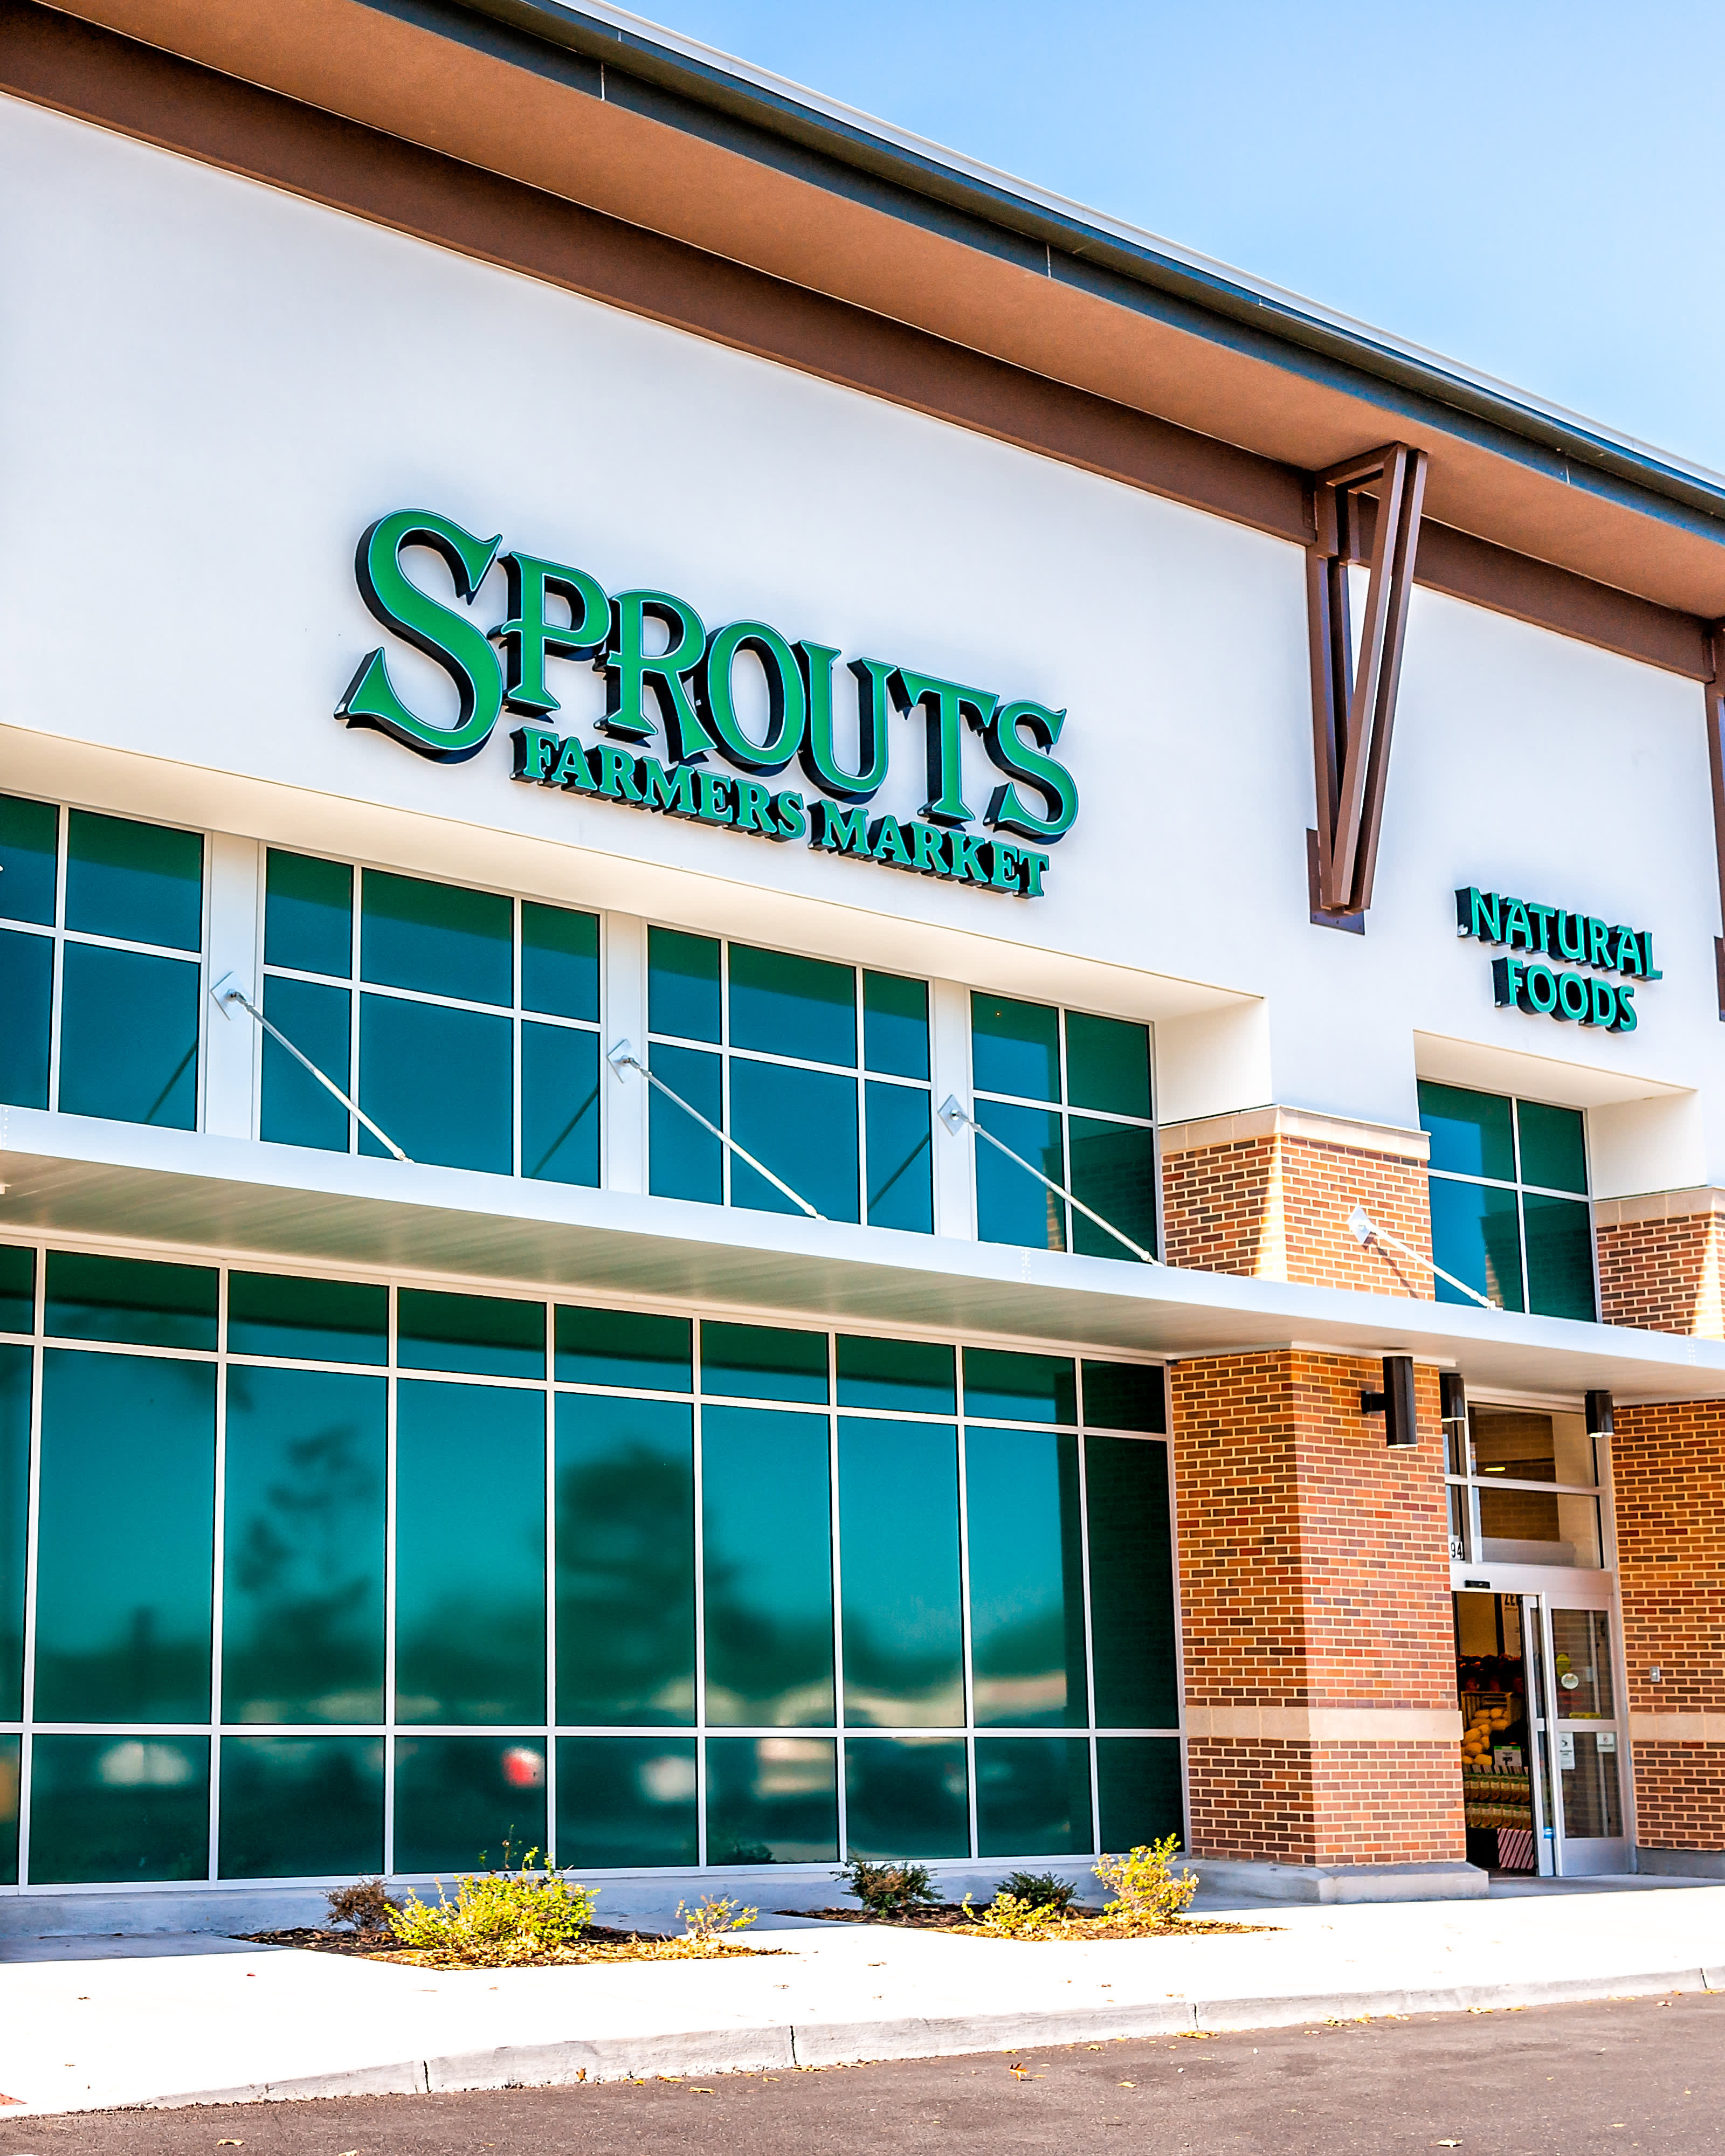 Coming soon to Sprouts: Salad bar, in-house-made sushi and entrees